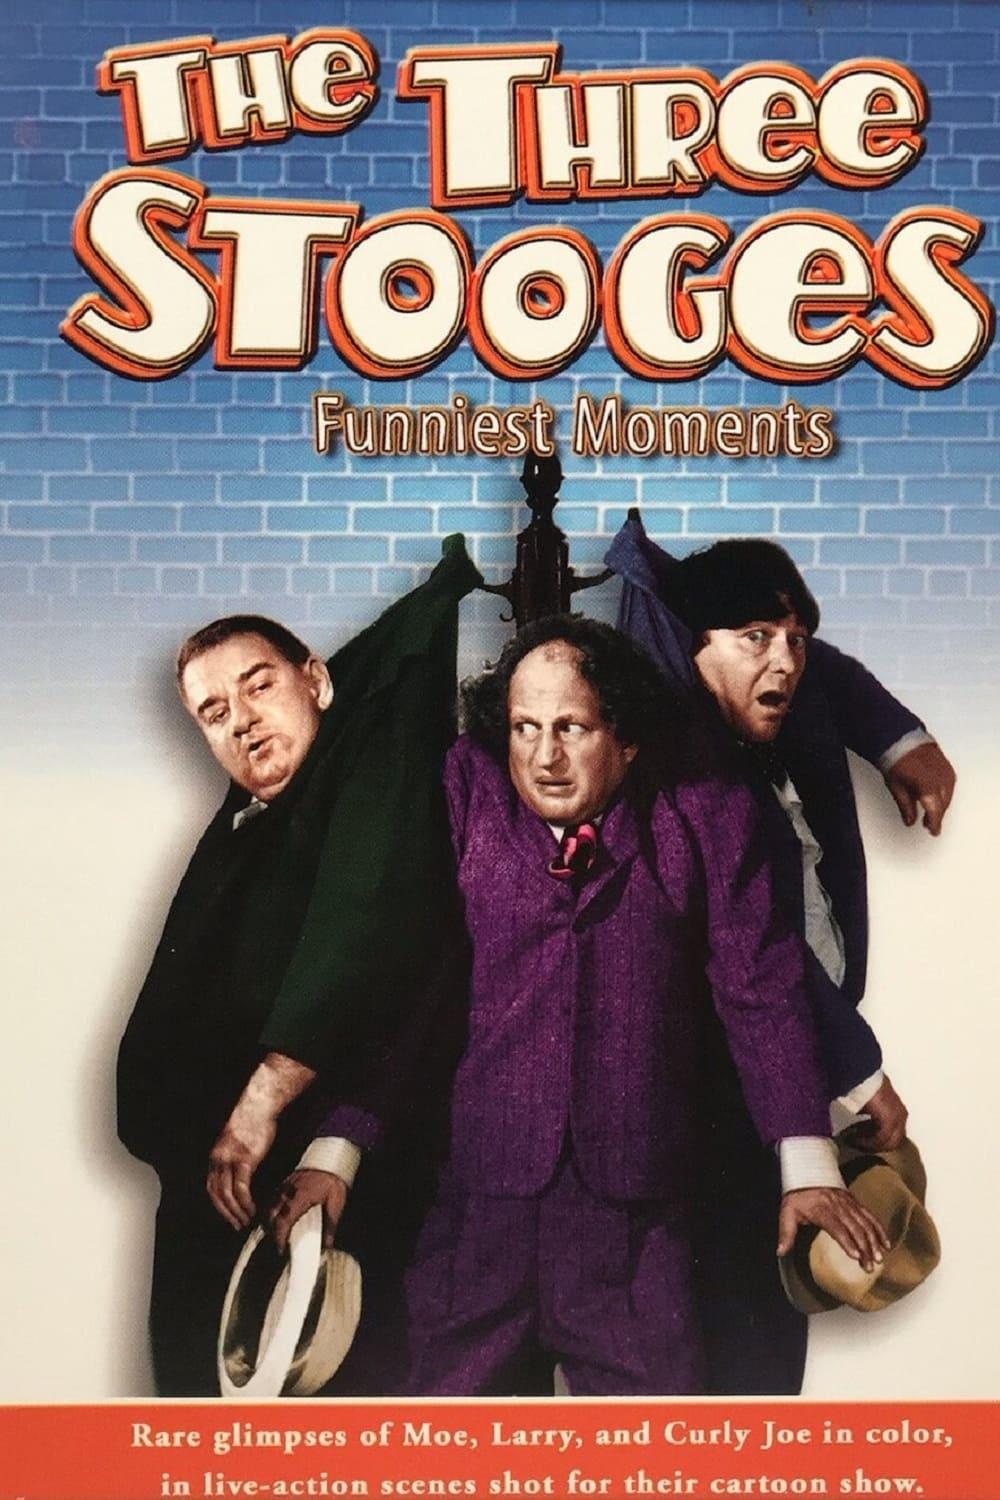 The Three Stooges Funniest Moments - Volume I poster